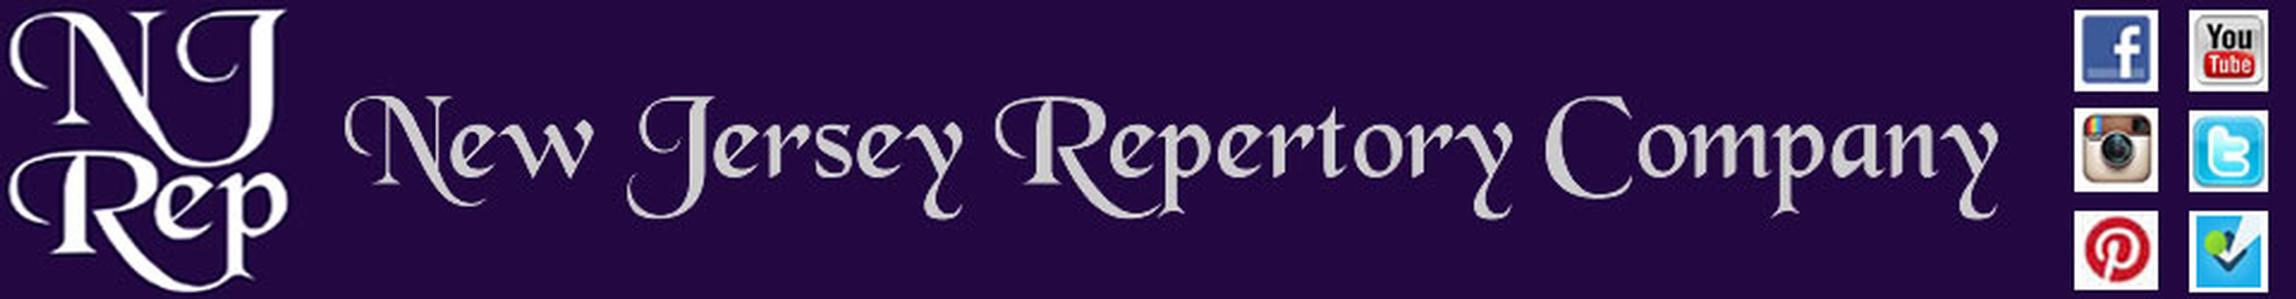 New Jersey Repertory Company Gift Certificate  